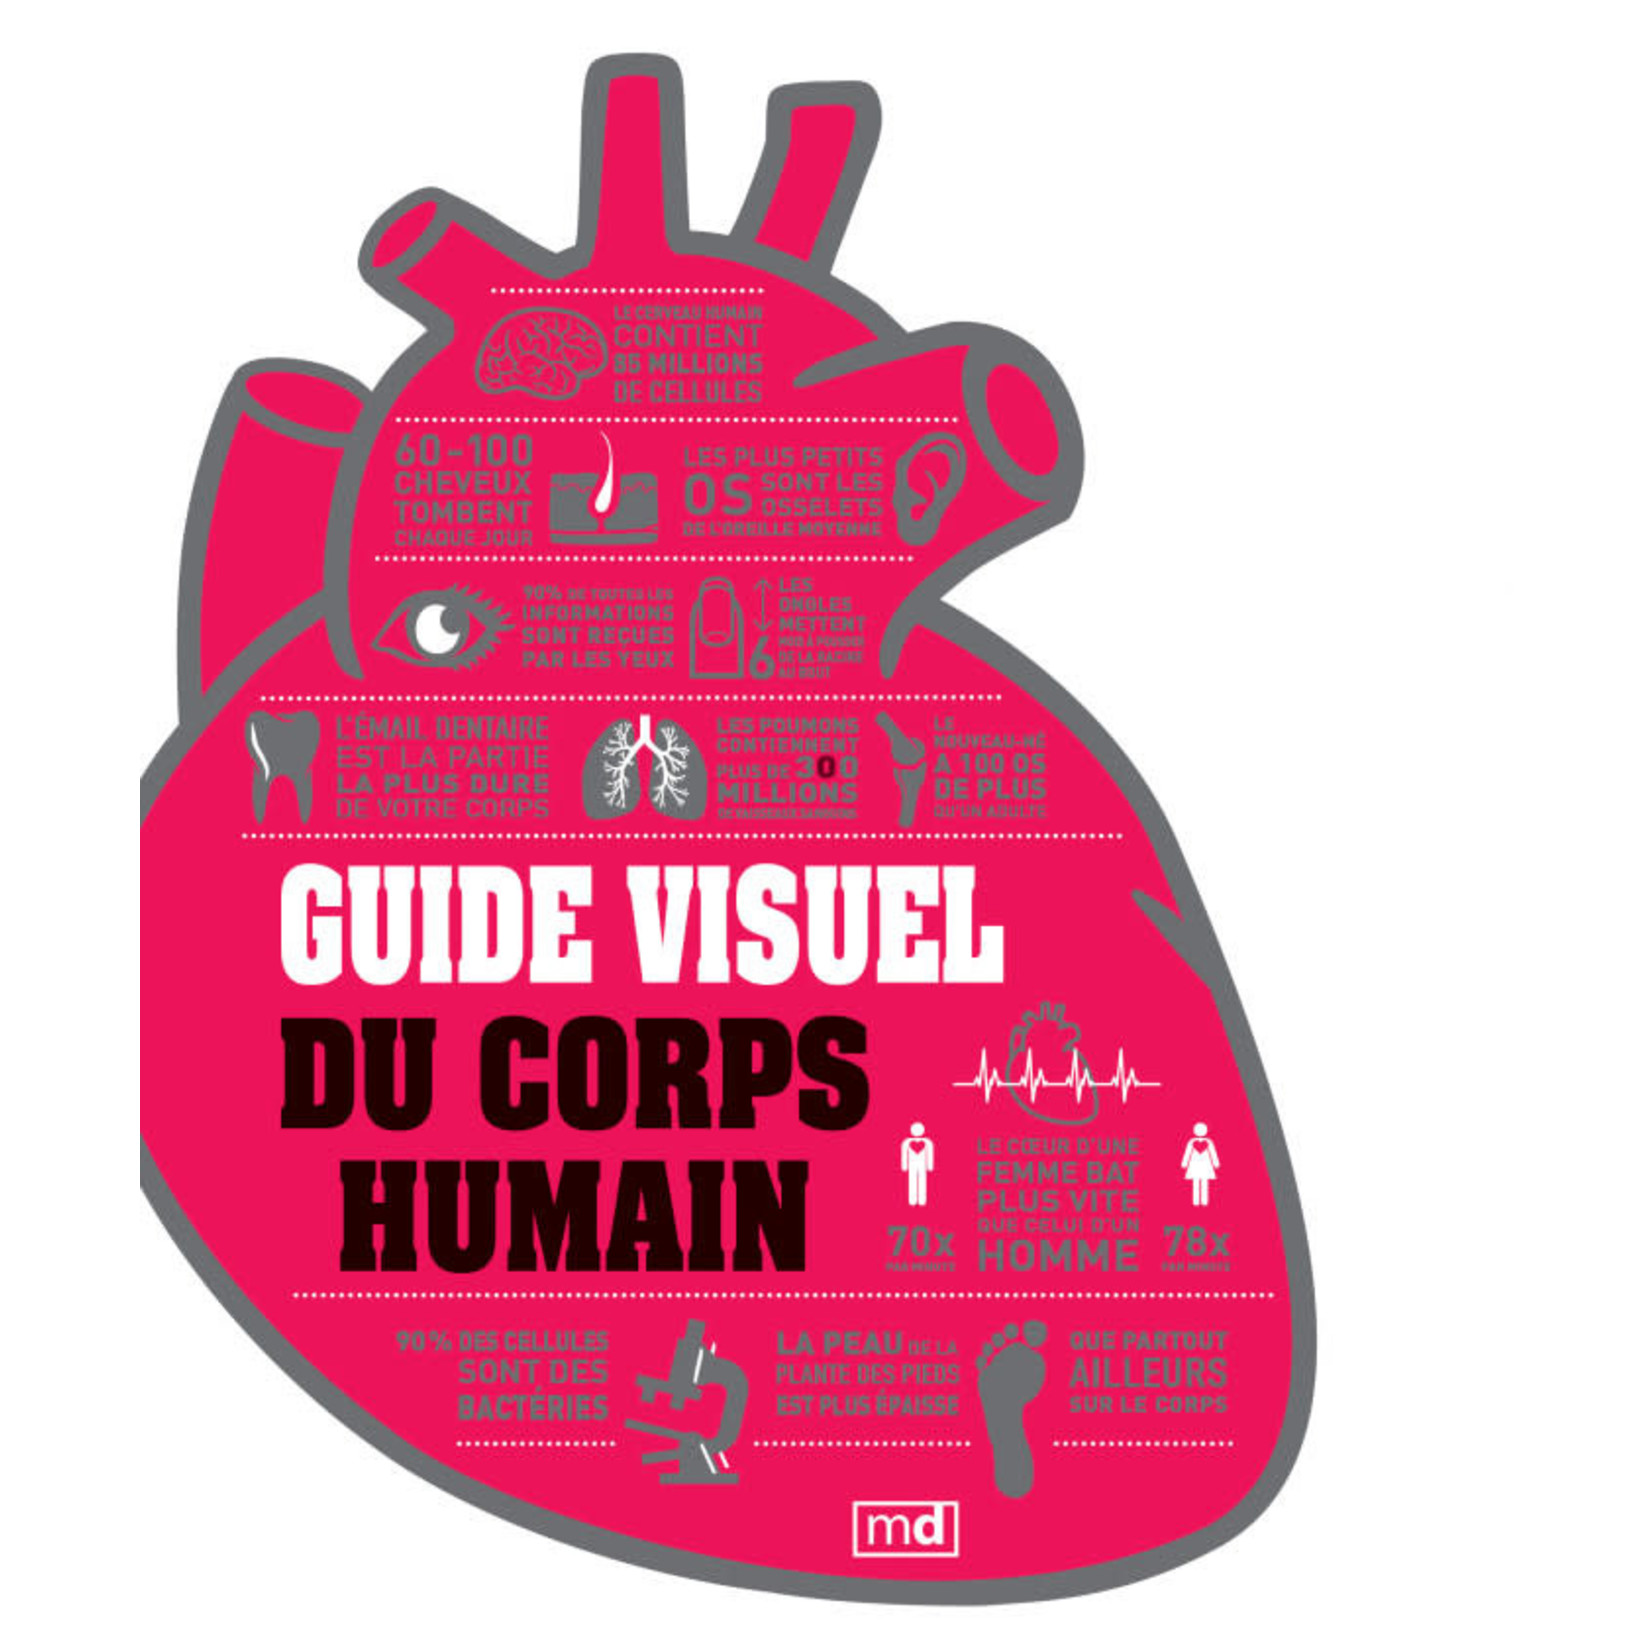 Science and Technology Guide visuel du corps humain